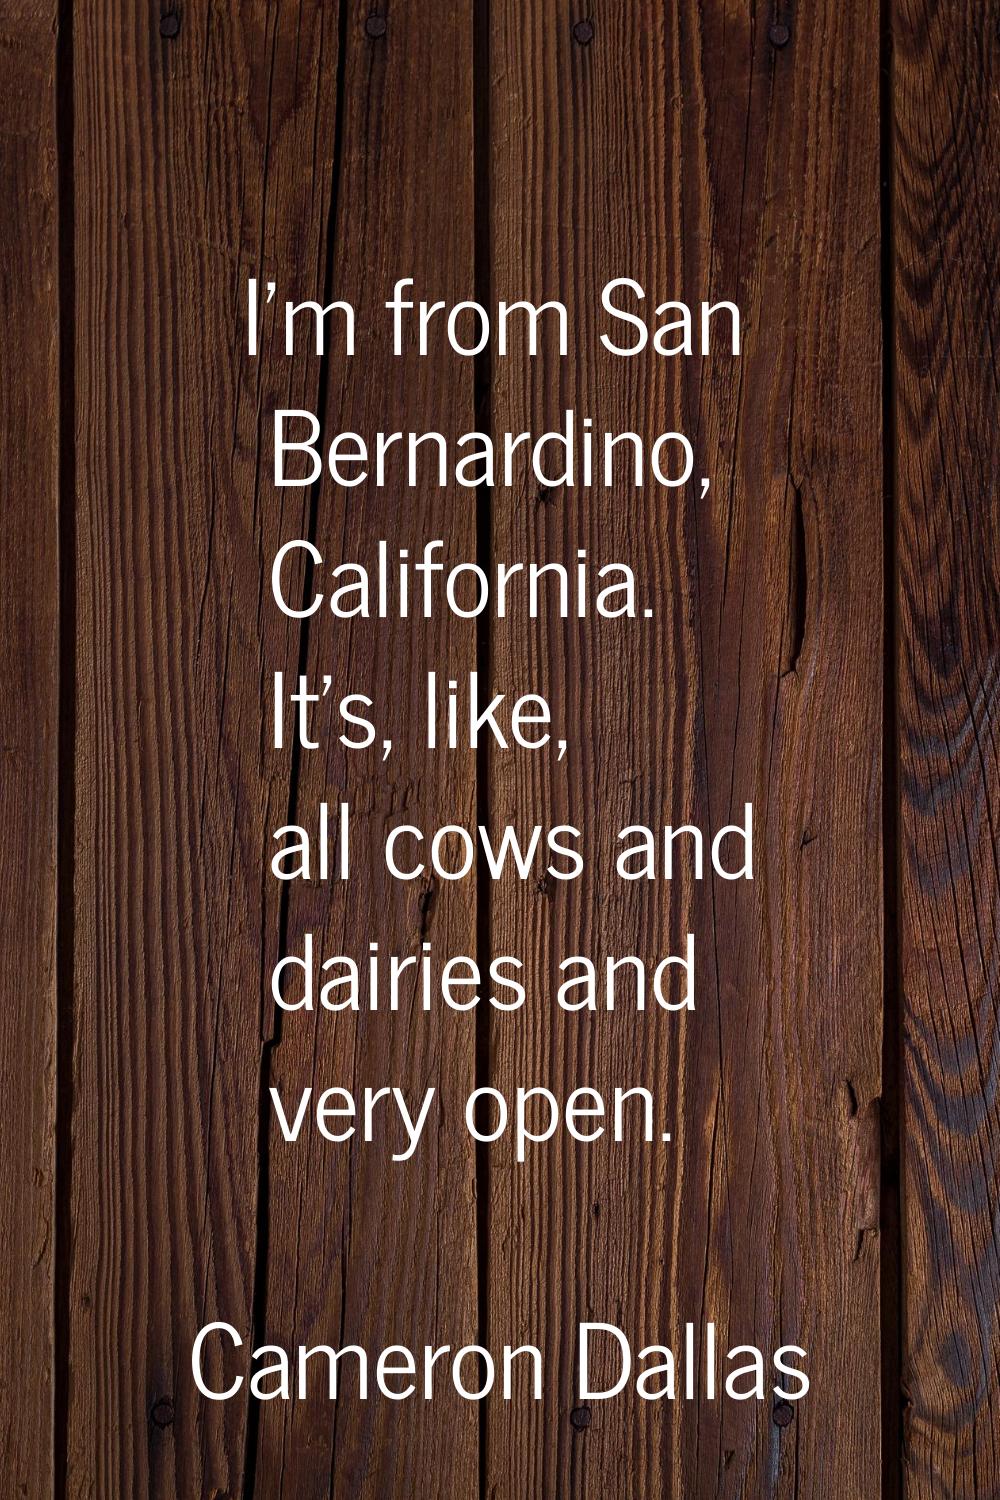 I'm from San Bernardino, California. It's, like, all cows and dairies and very open.